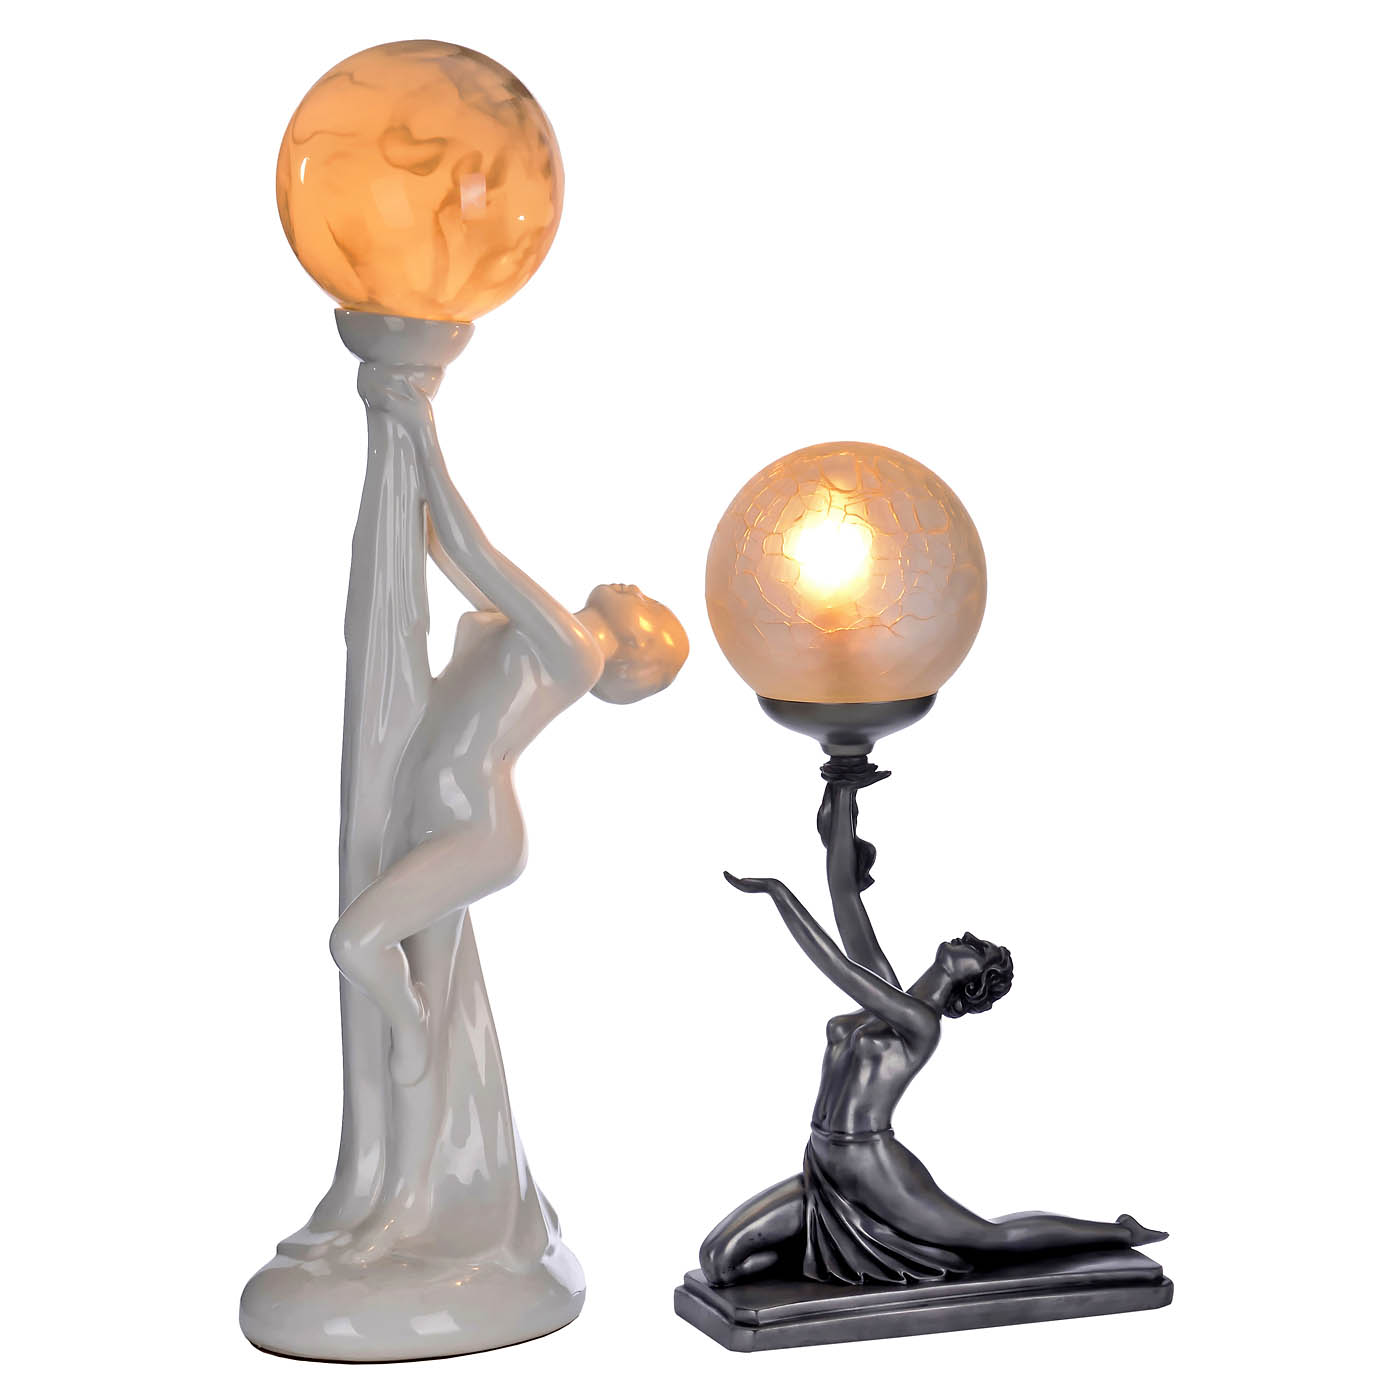 2 Art-Nouveau-Style Candle Holders and 4 Table Lamps, c. 1990 - Image 4 of 5